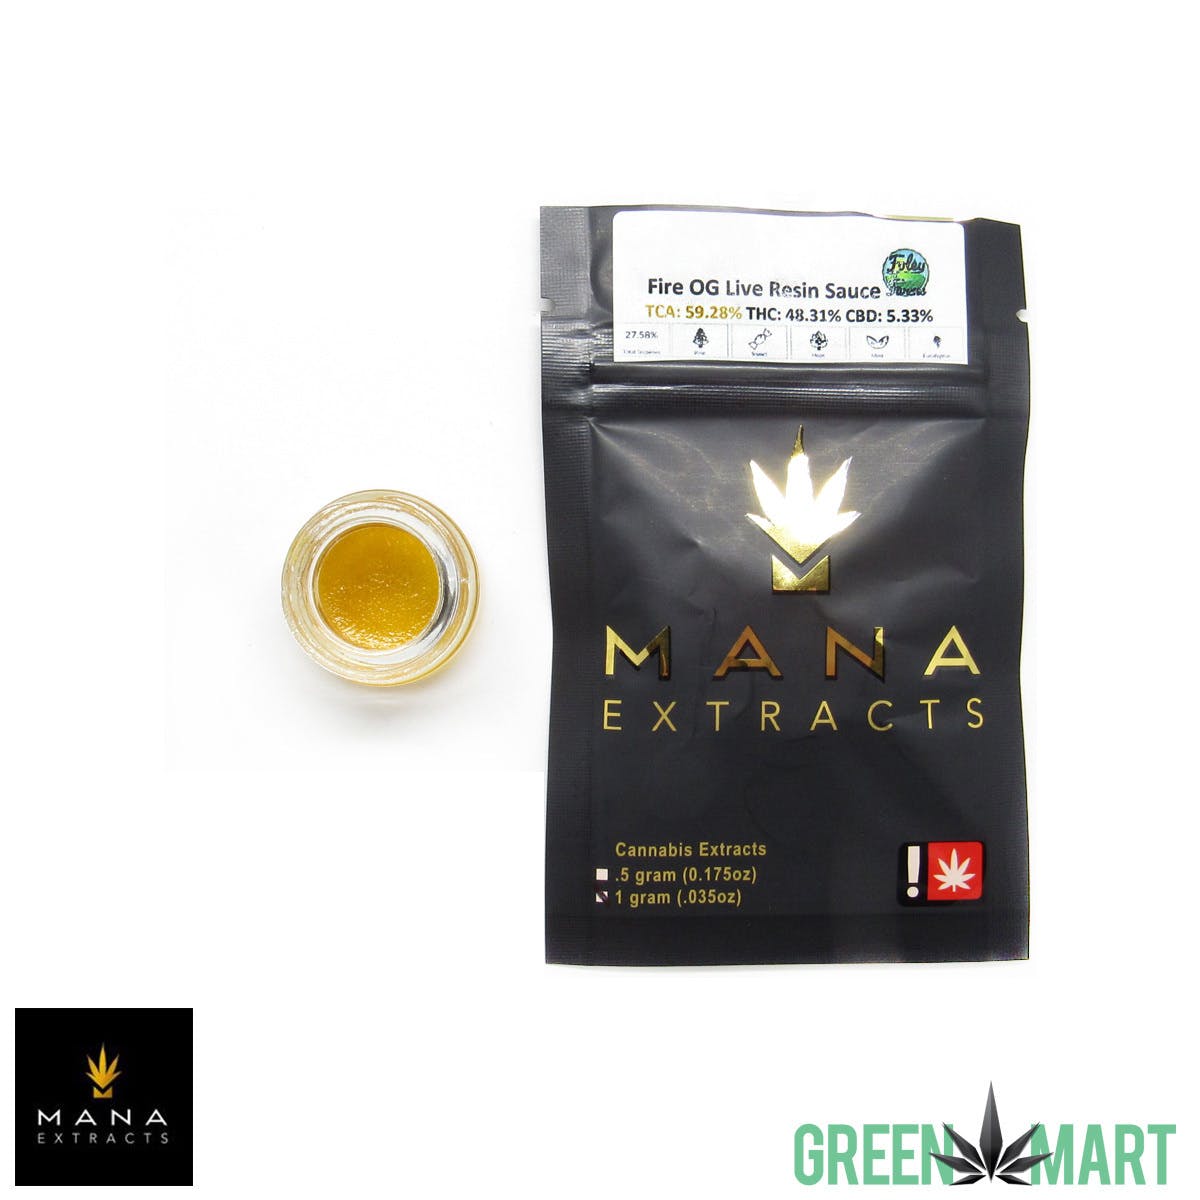 Mana Extracts - Fire OG Live Resin Sauce